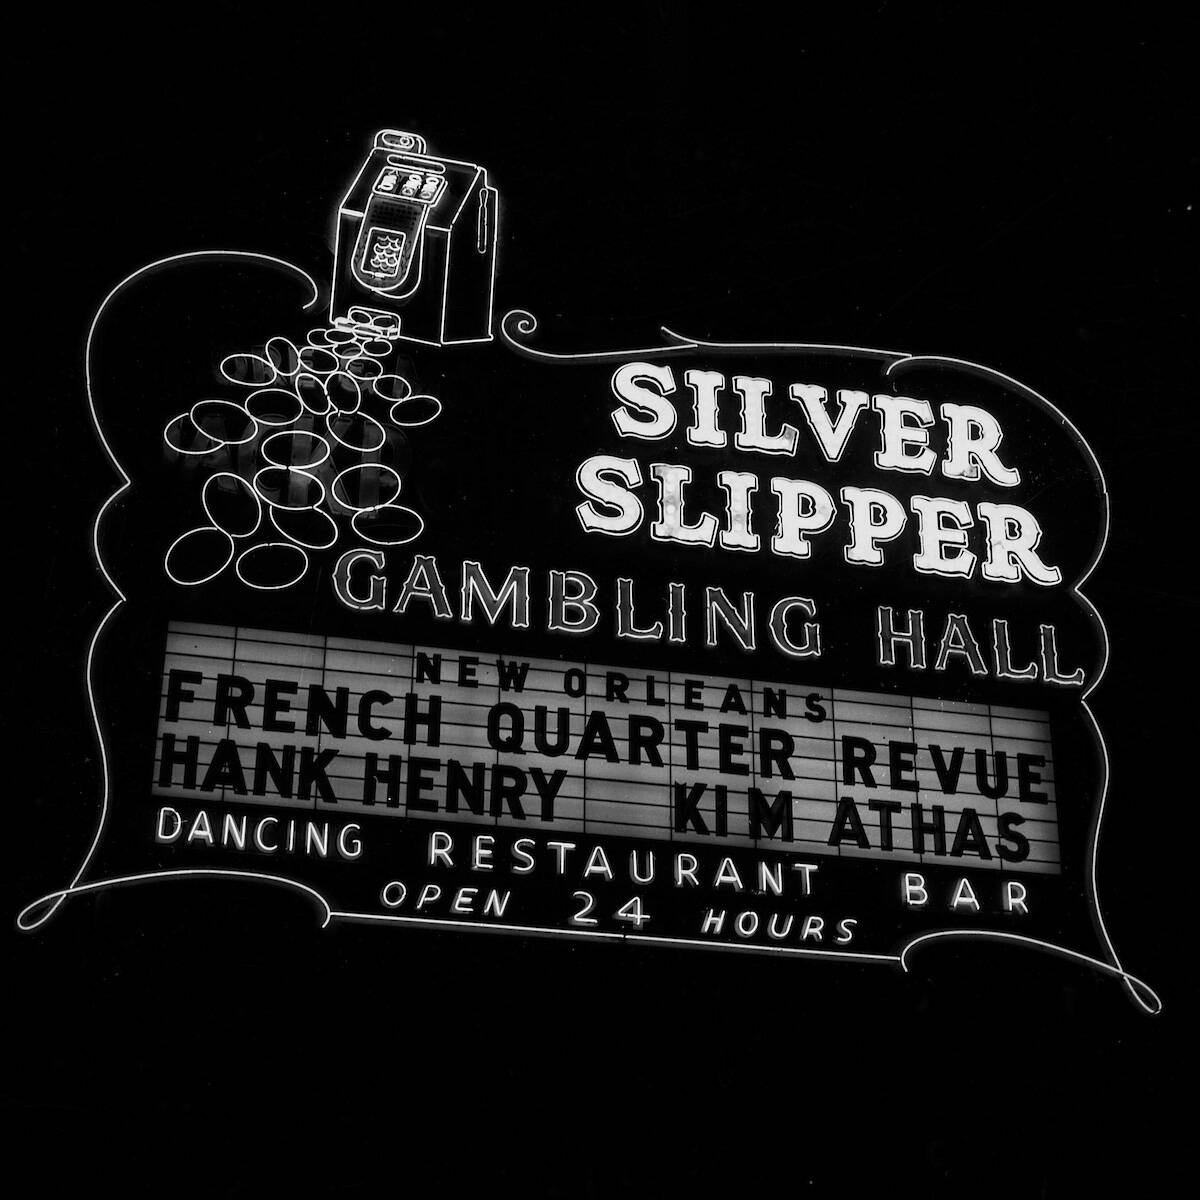 The Silver Slipper Gambling Hall features the New Orleans French Quarter Revue, Hank Henry and ...